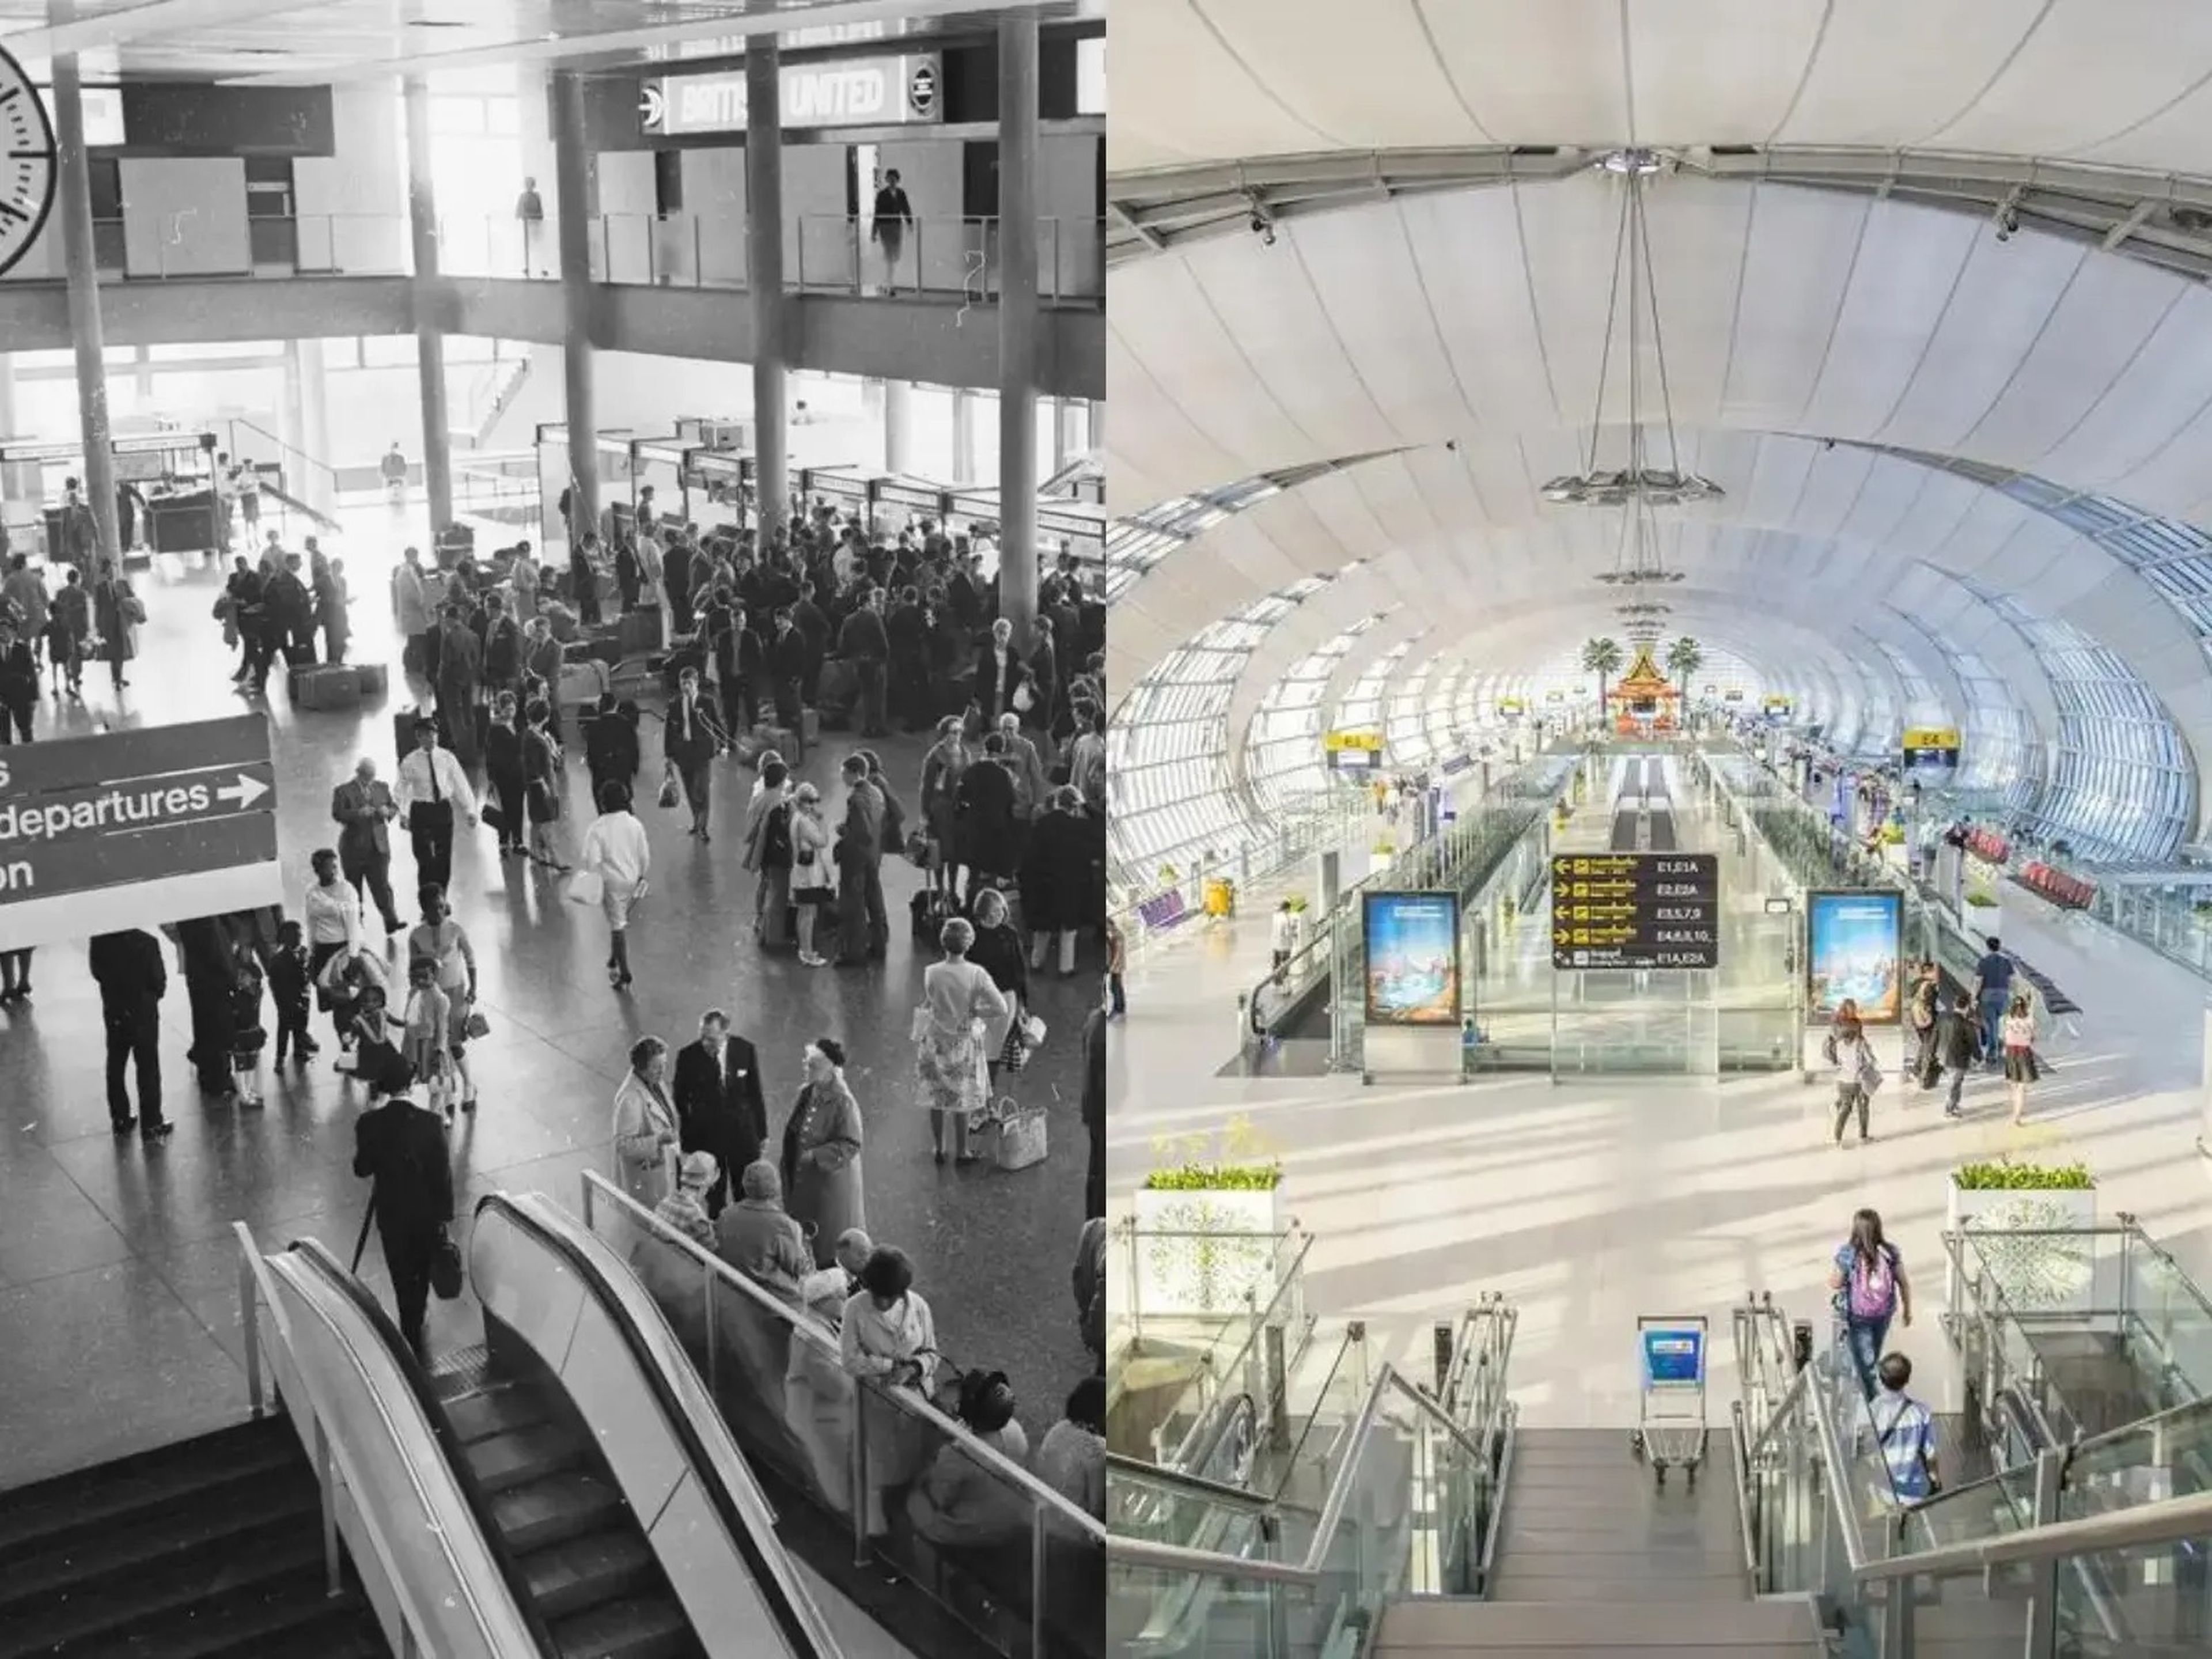 A split image of an old airport and a modern airport